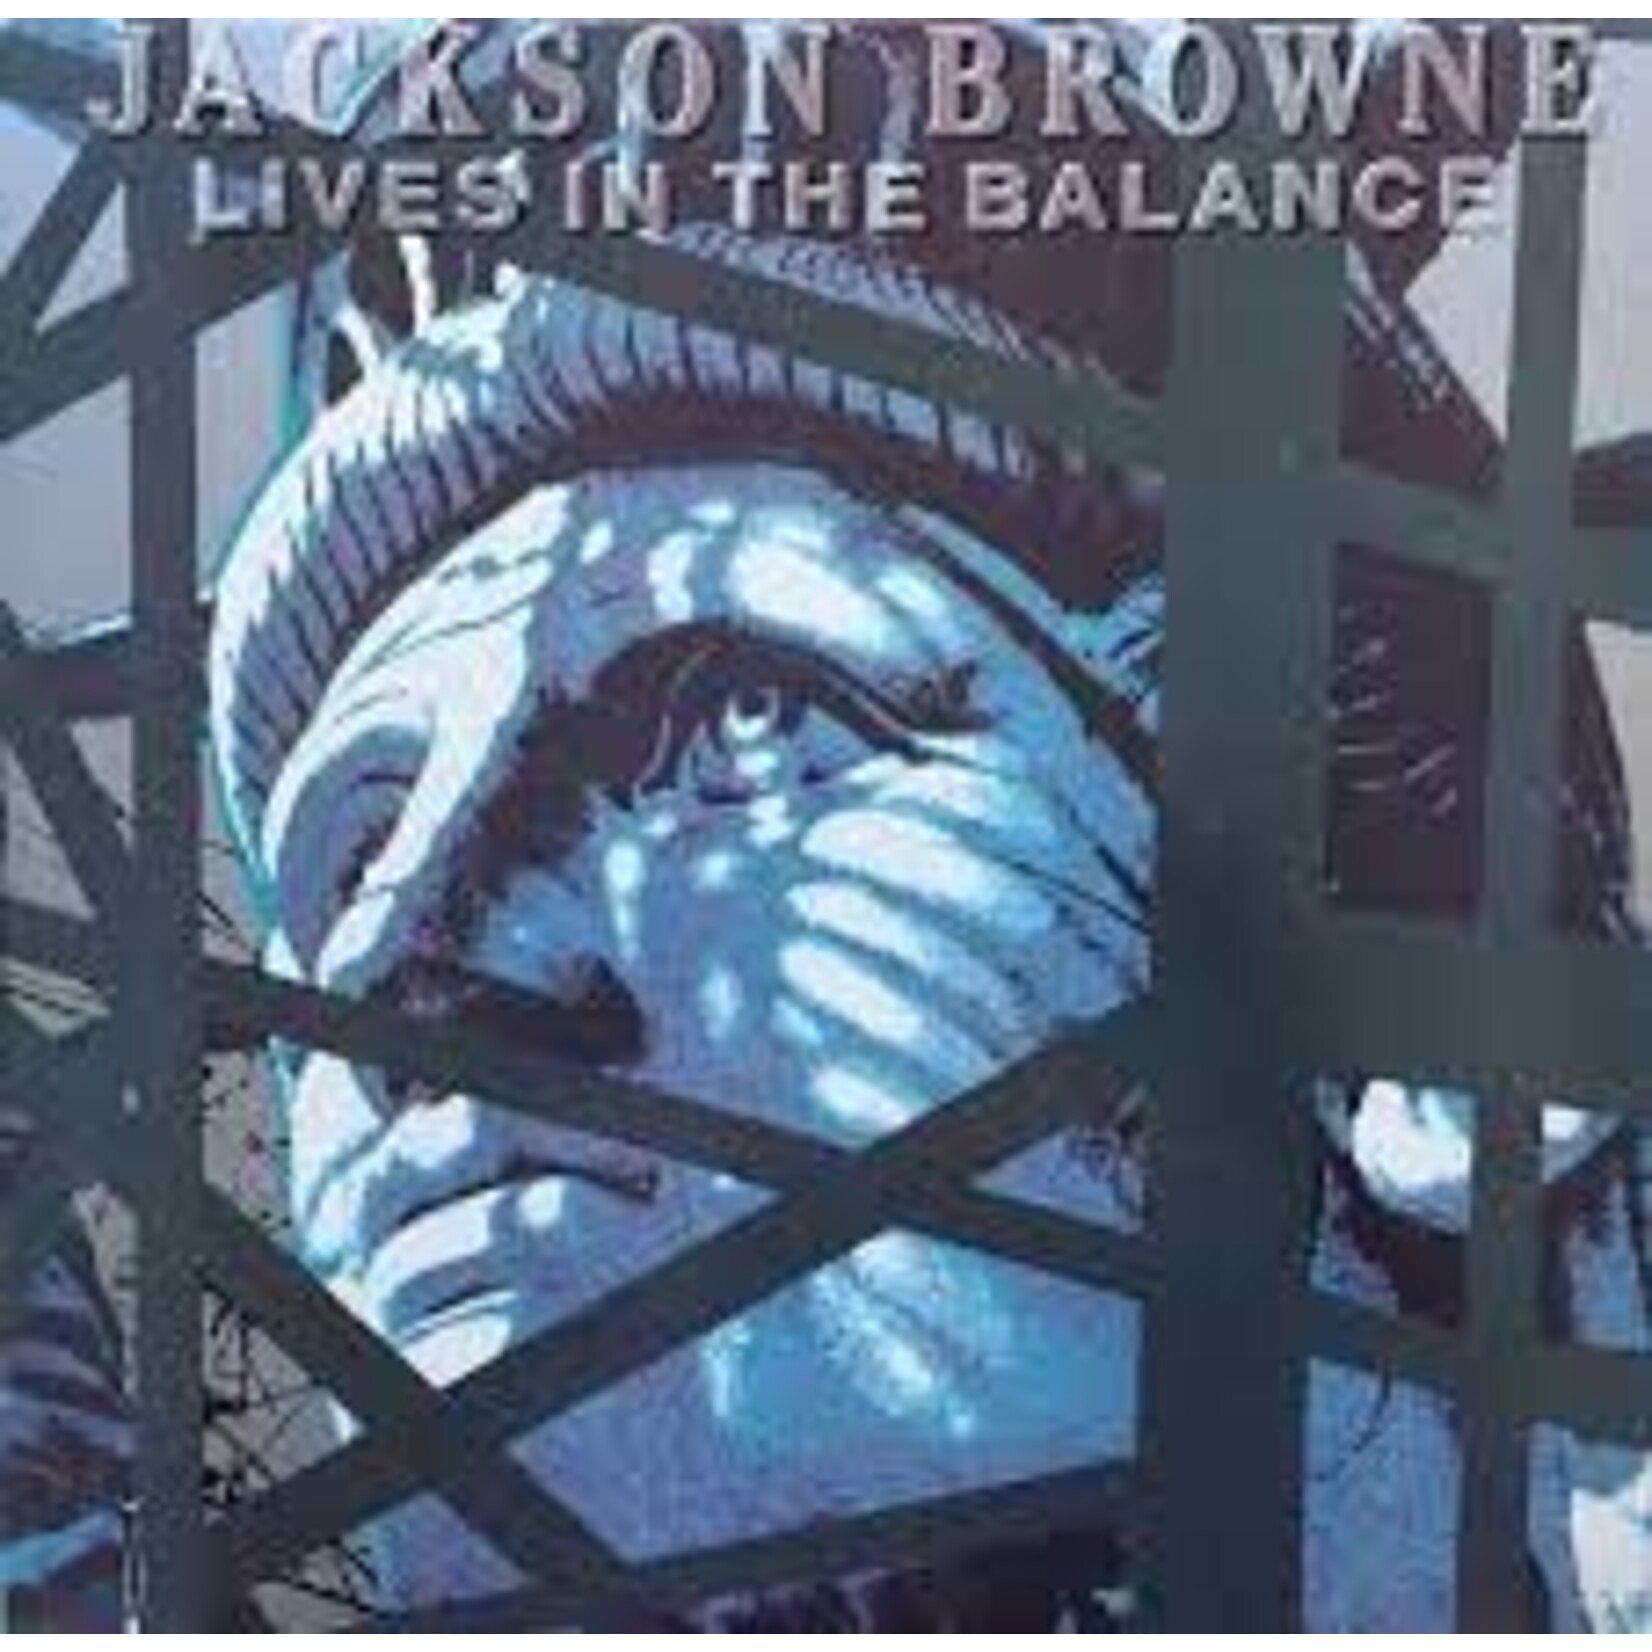 JACKSON BROWNE - lives in the balance LP